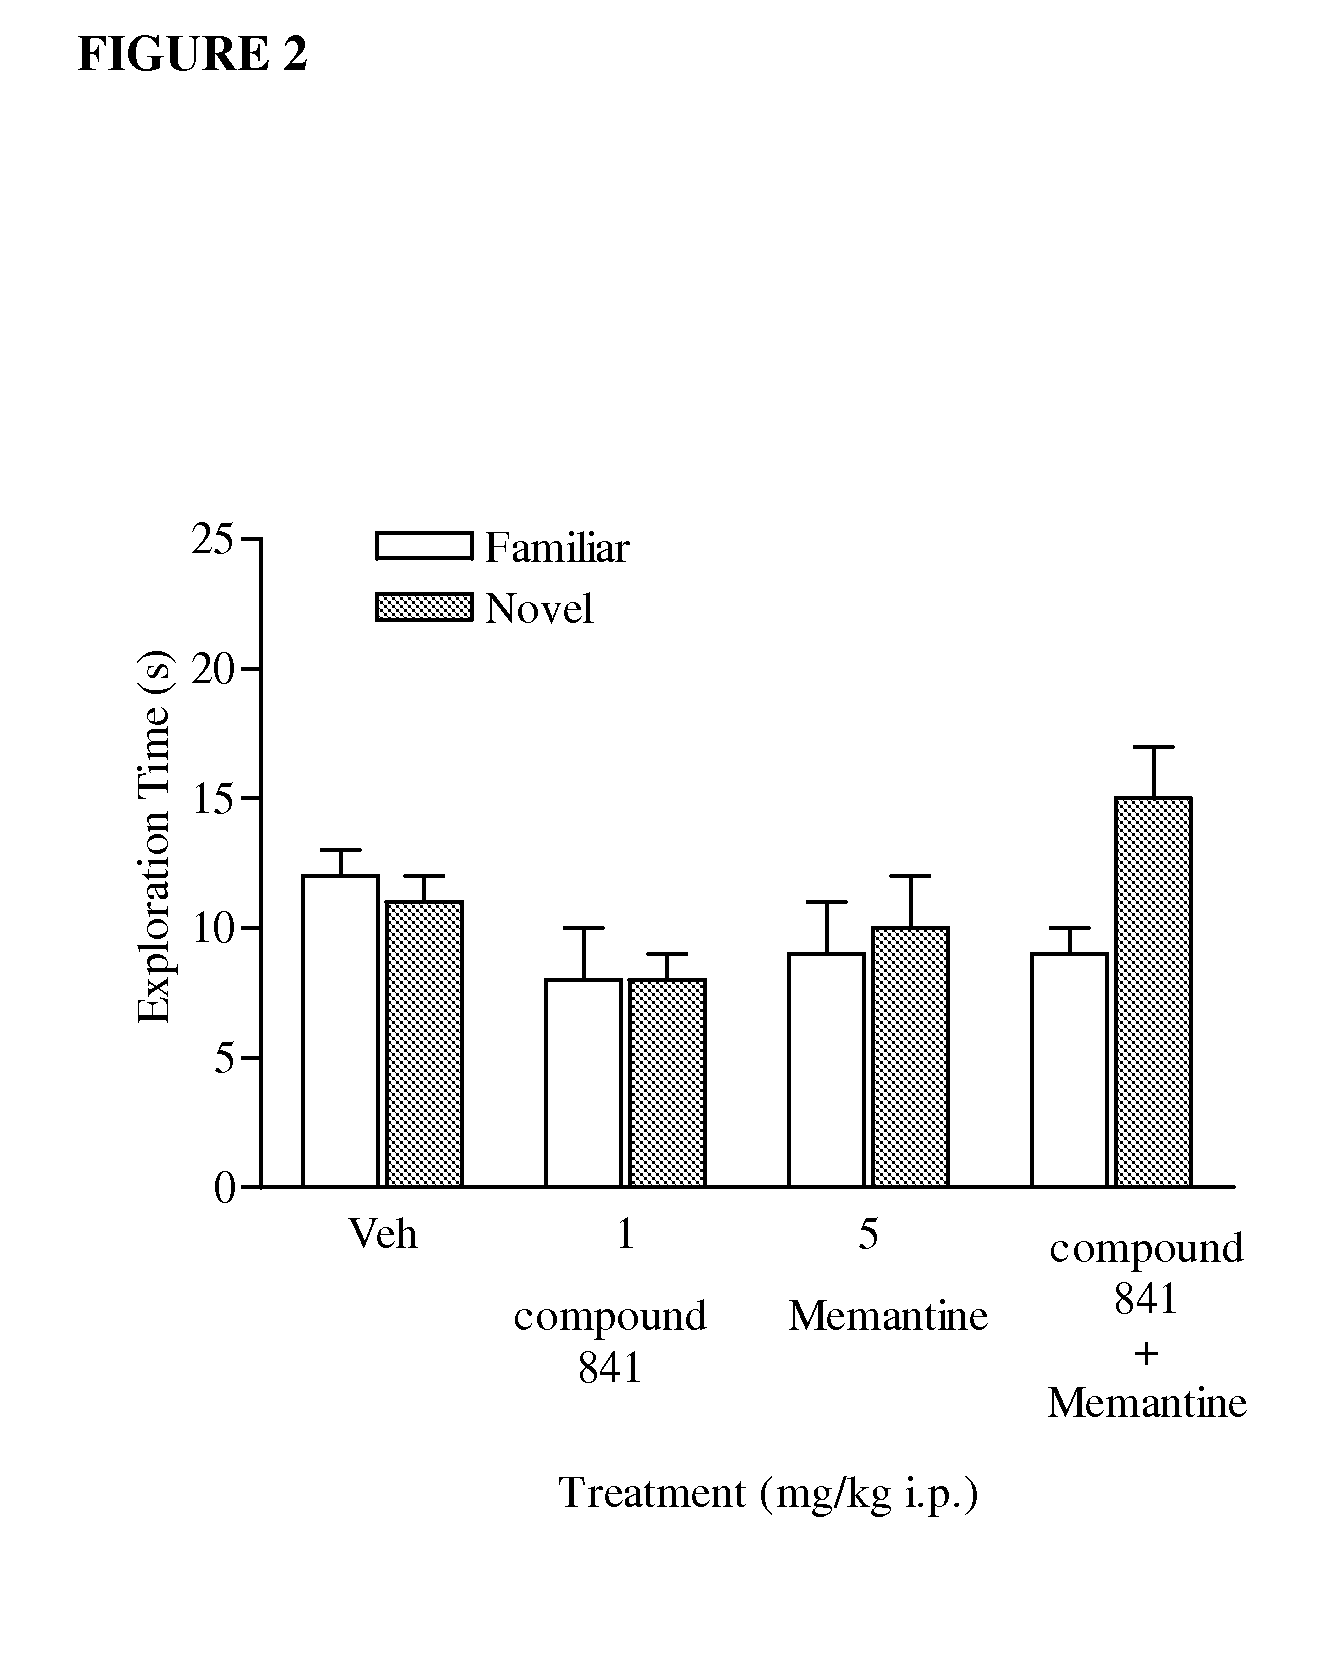 Combination of NMDA-Receptor Ligand and a Compound With 5-HT6 Receptor Affinity